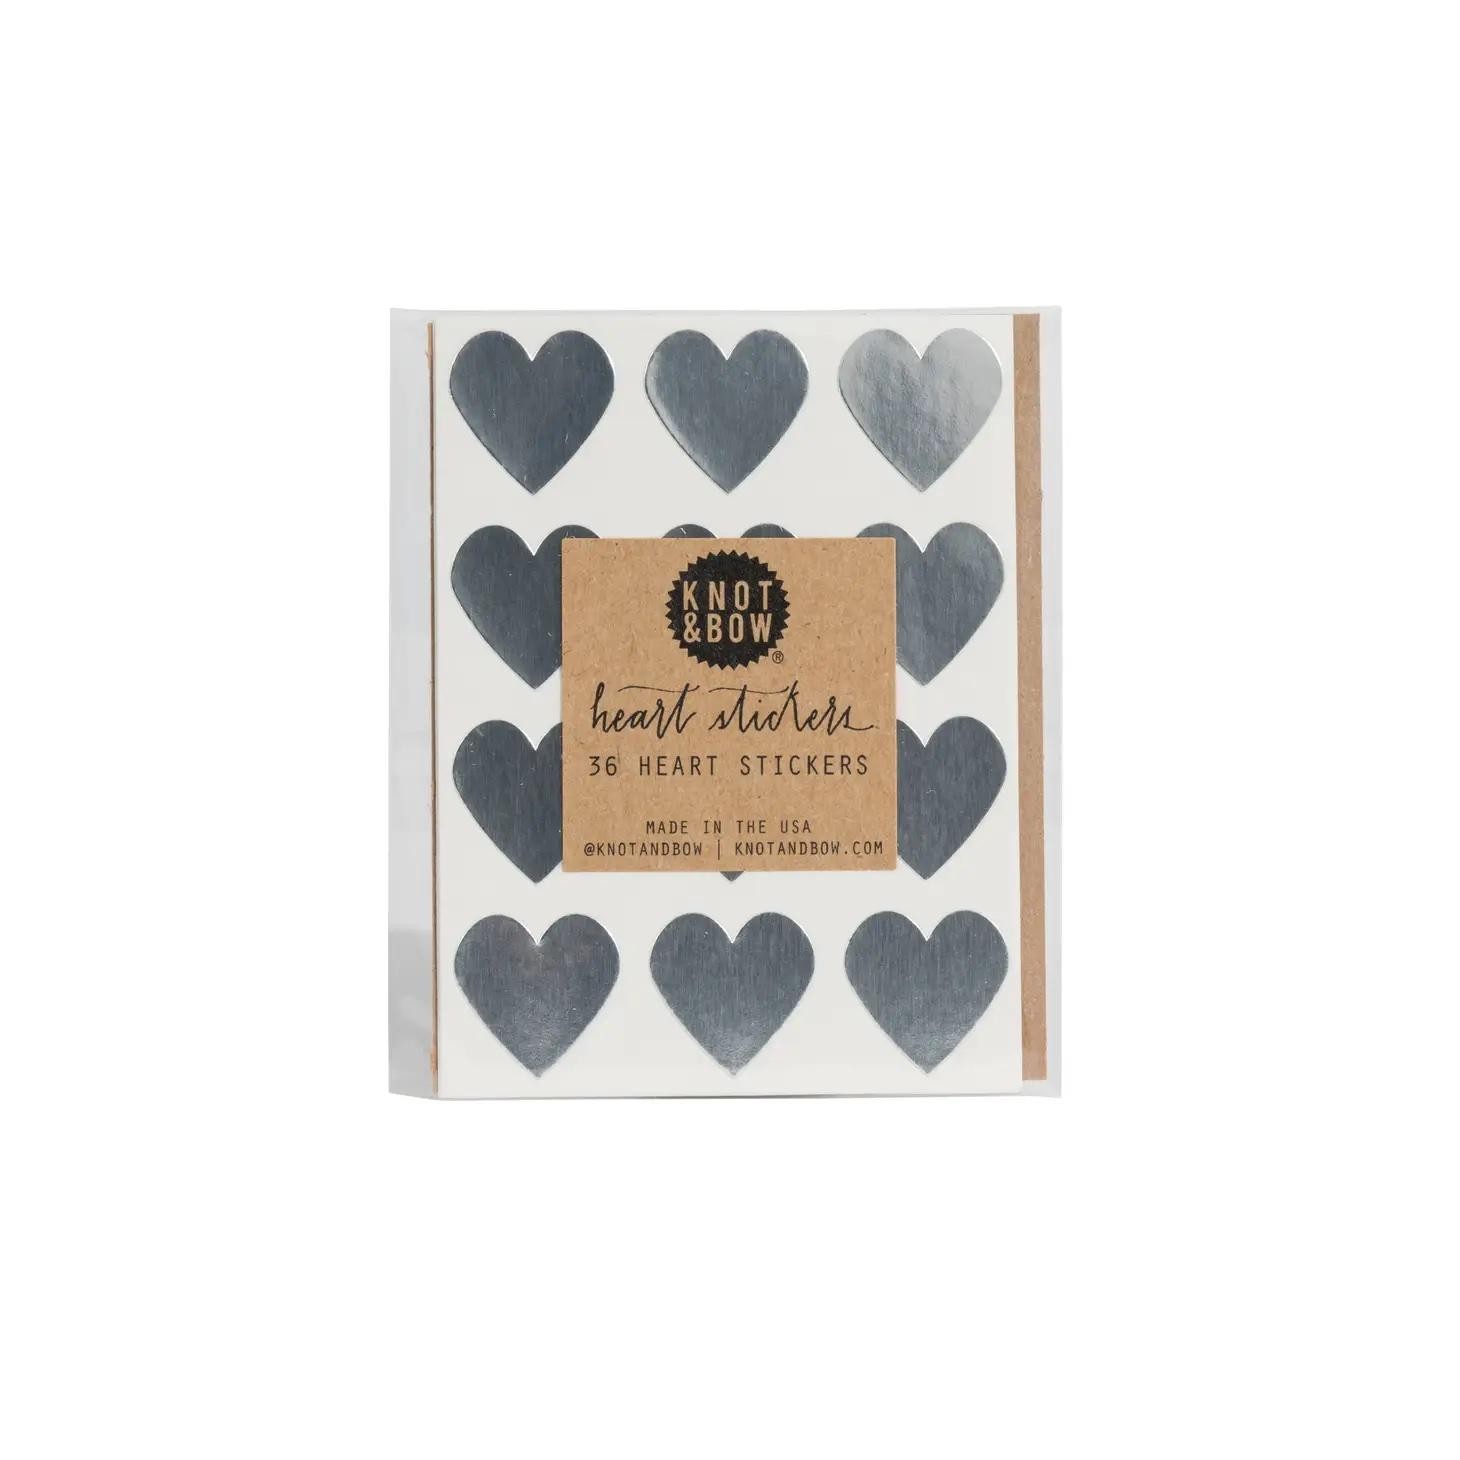 KNO Heart stickers silver